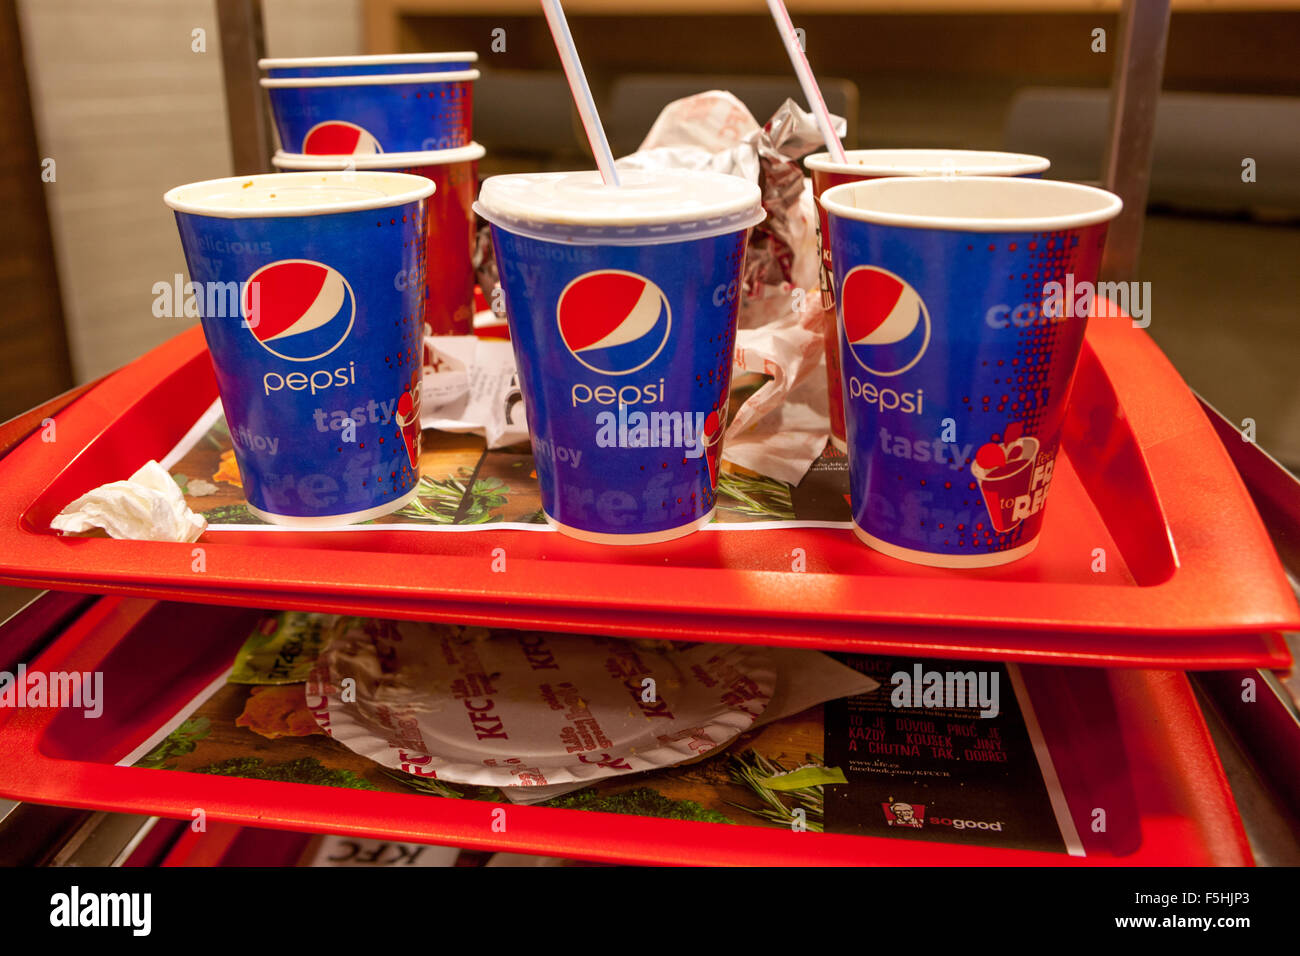 Leftover food on a tray, Pepsi cups, KFC waste, Czech Republic Stock Photo